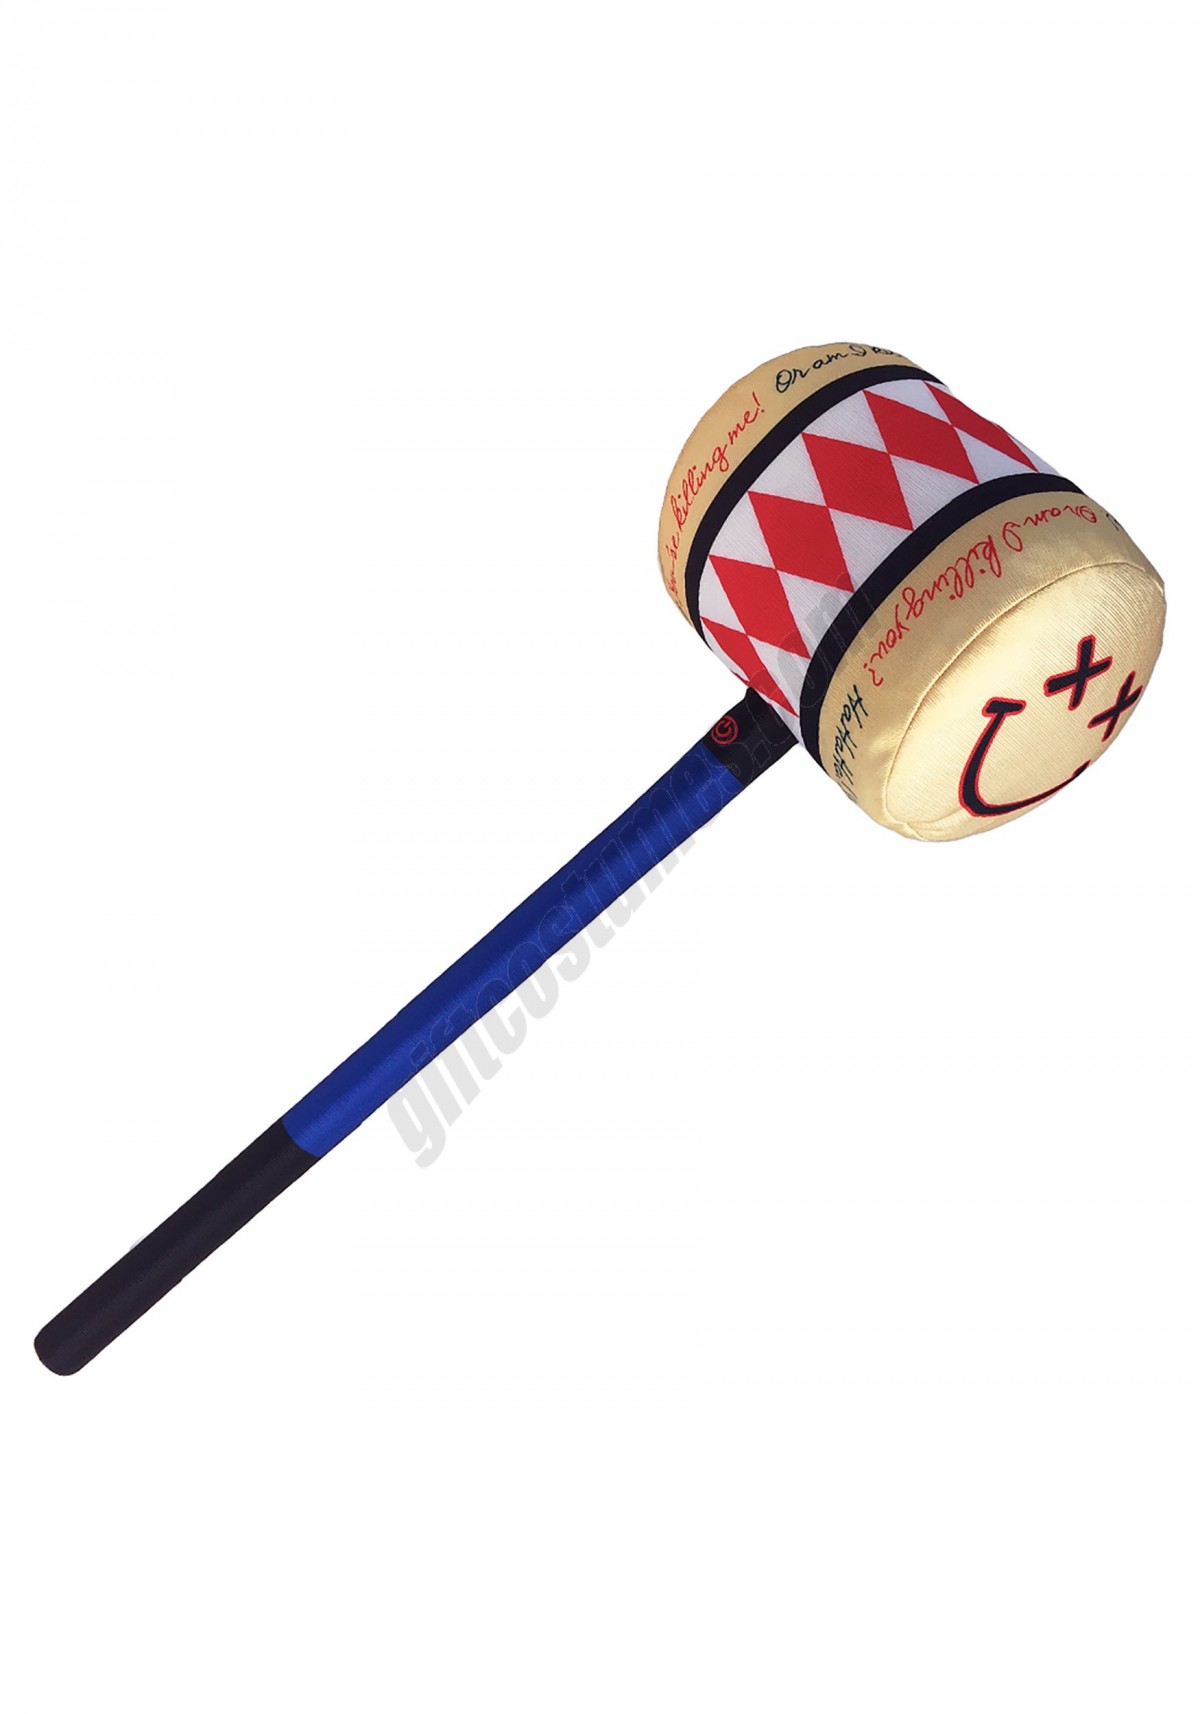 Suicide Squad Harley Quinn SWAT Mallet Promotions - -0